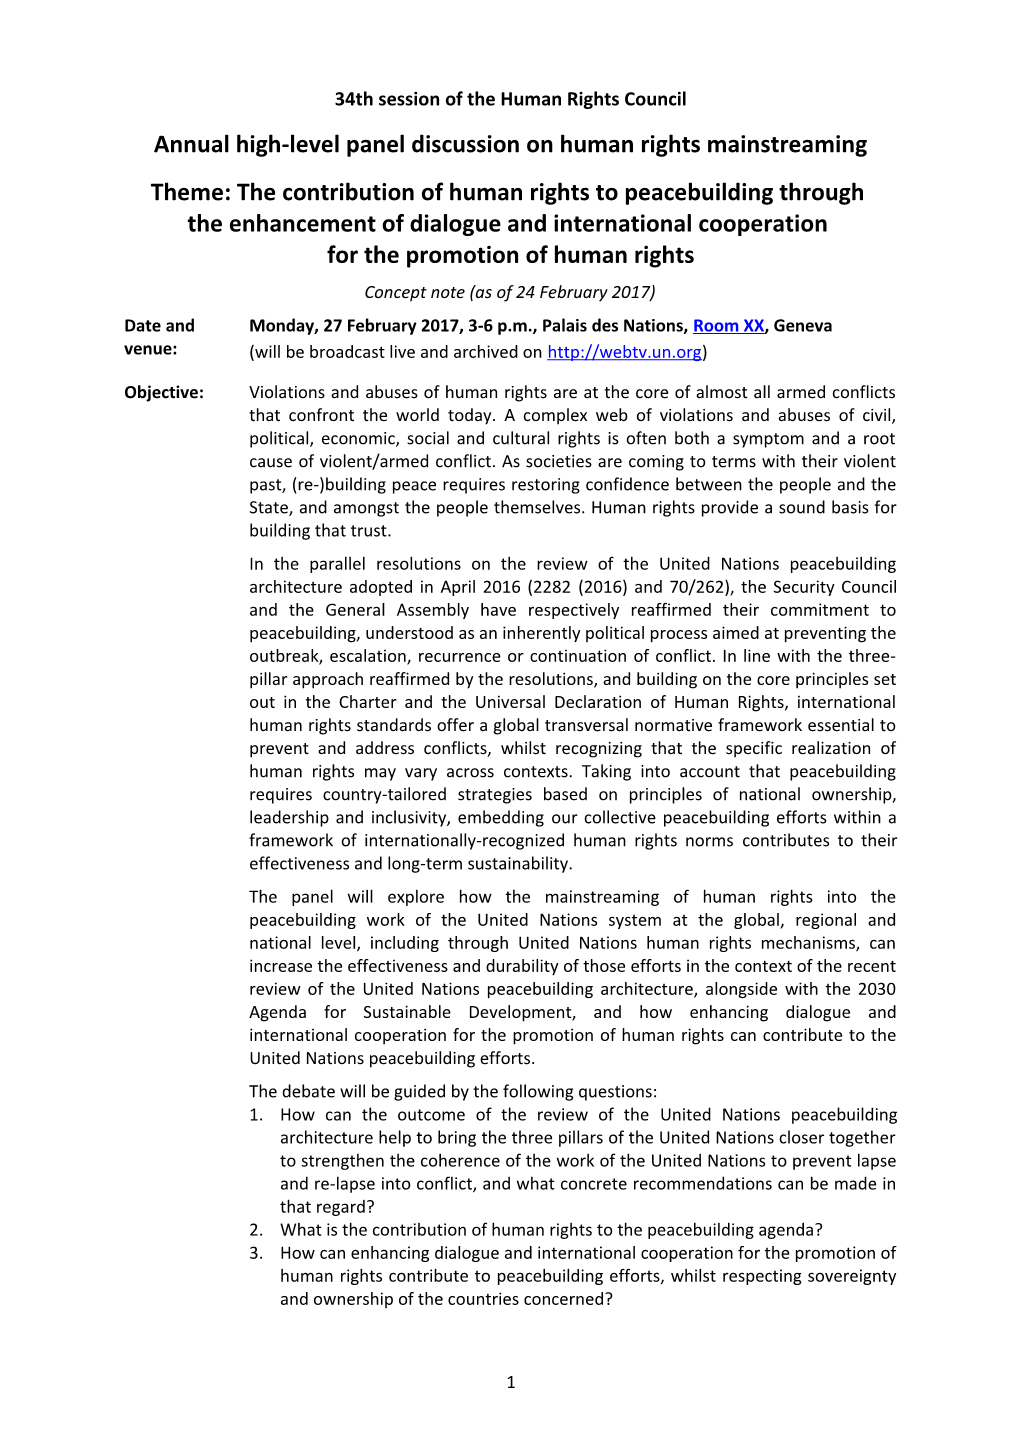 Annual High-Level Panel Discussion on Human Rights Mainstreaming